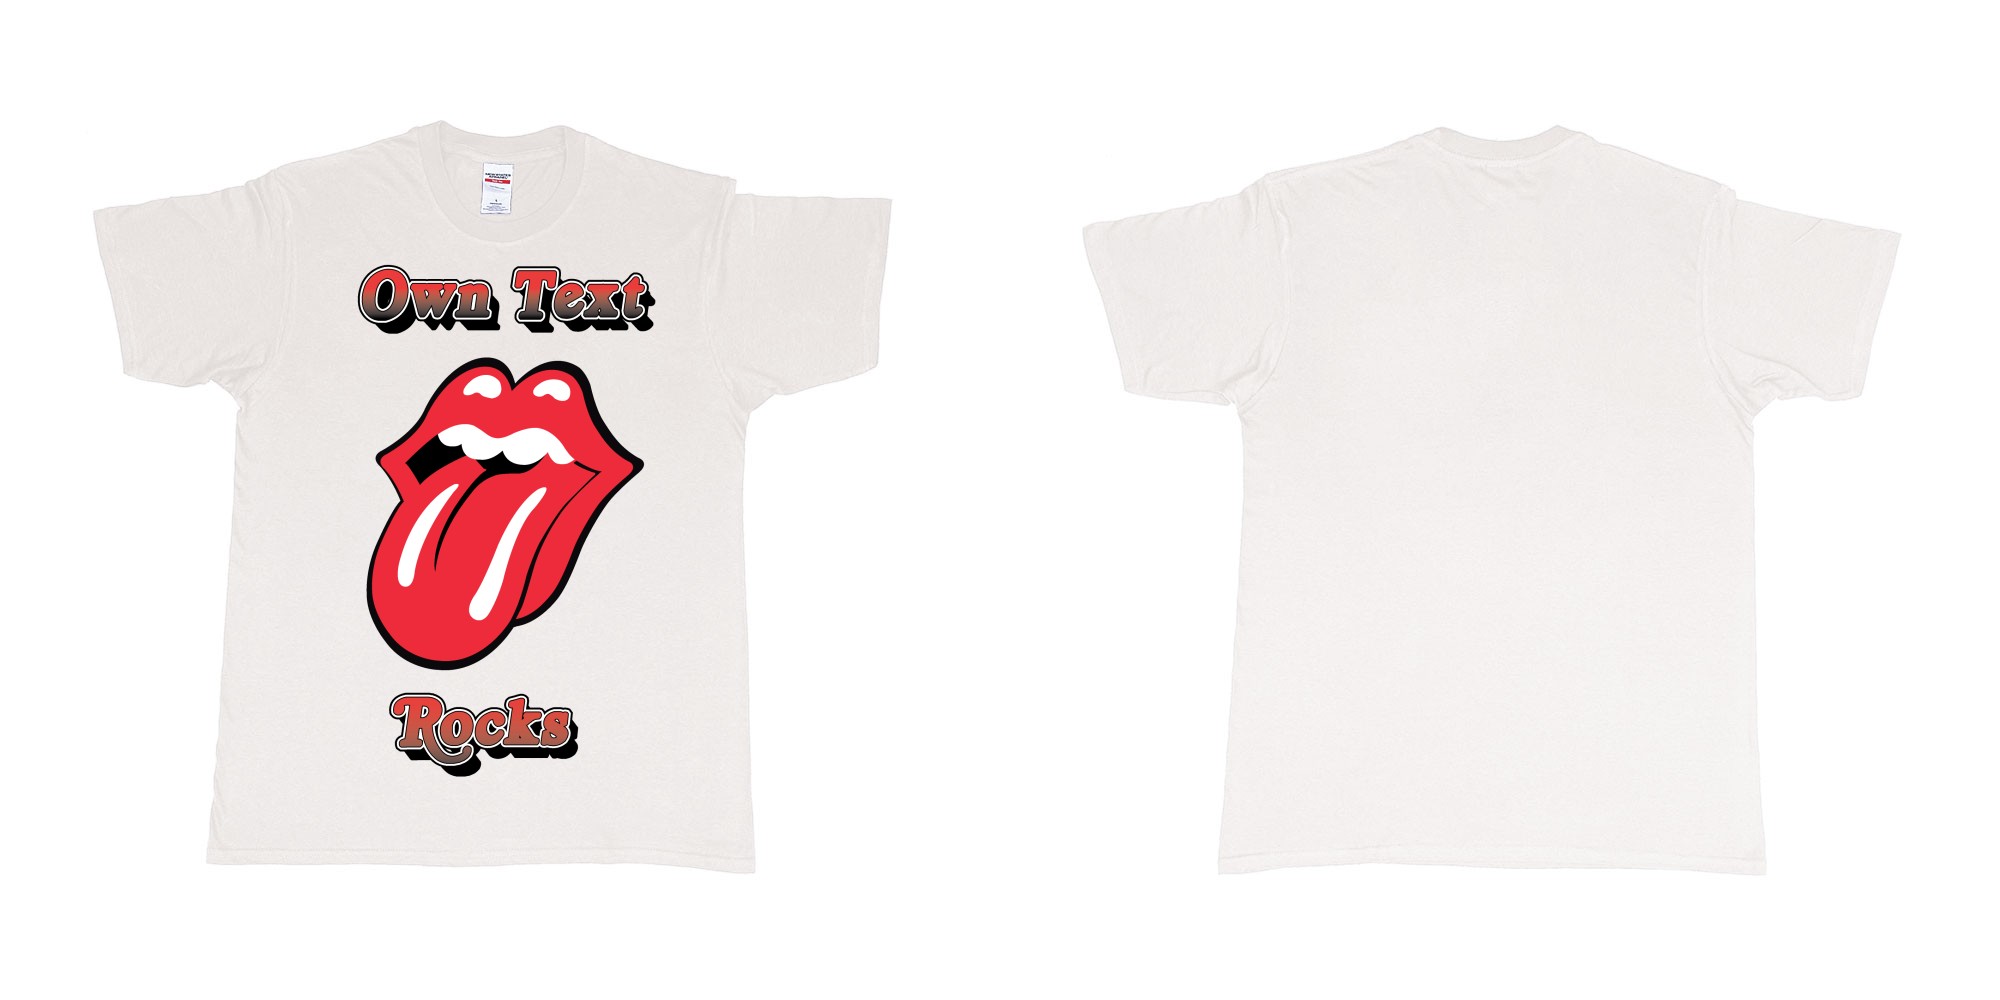 Custom tshirt design own custom text rocks rolling stones logo red tongue and lips print bali in fabric color white choice your own text made in Bali by The Pirate Way